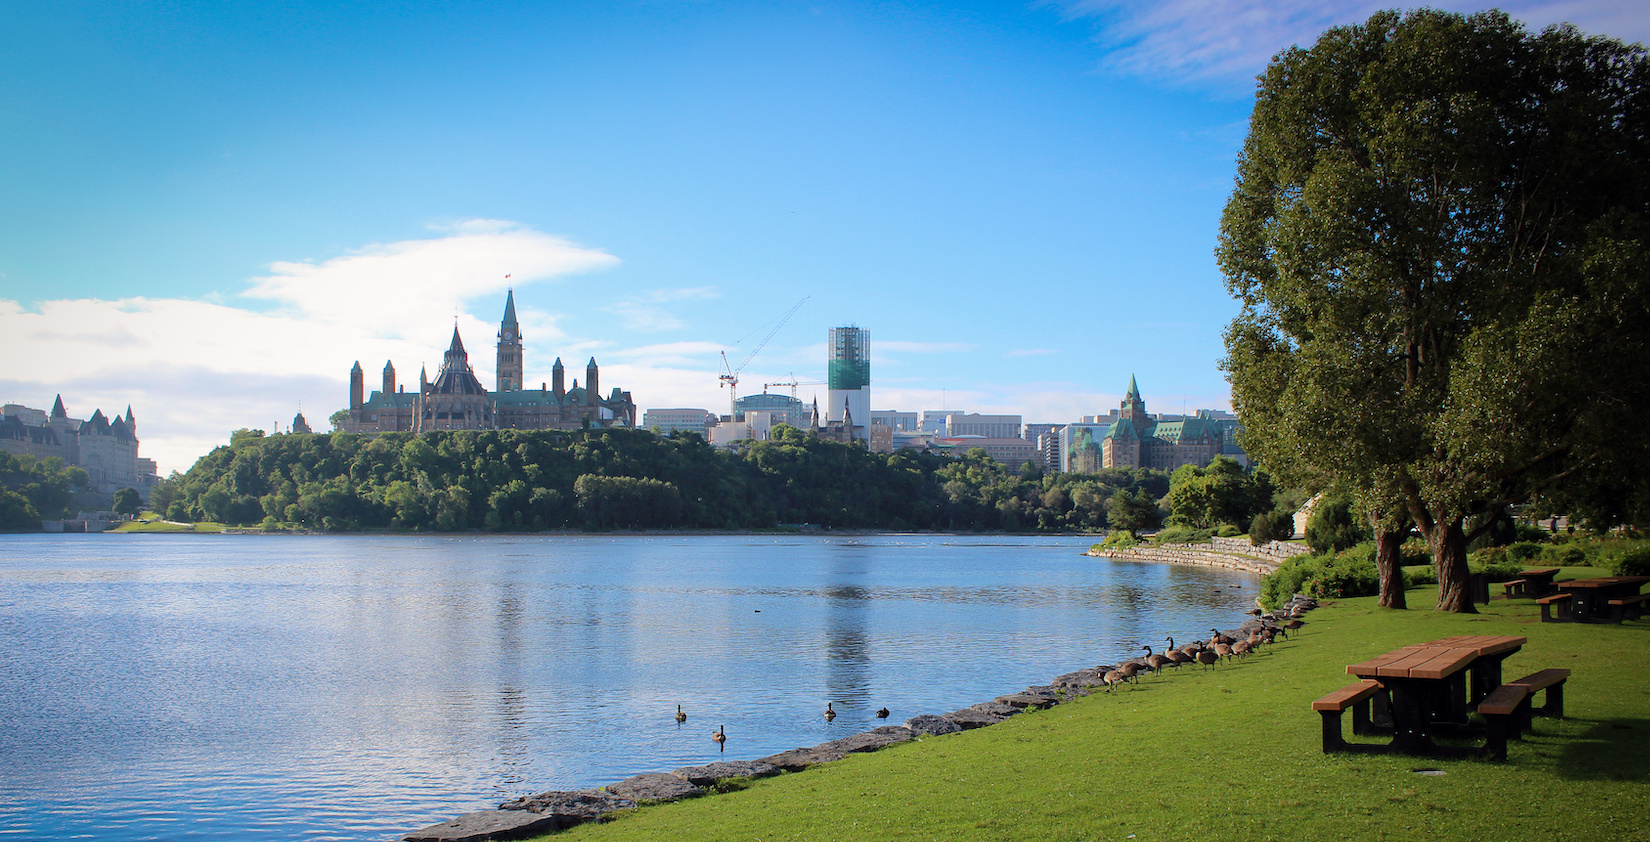 View of a waterway and the parliament in Ottawa